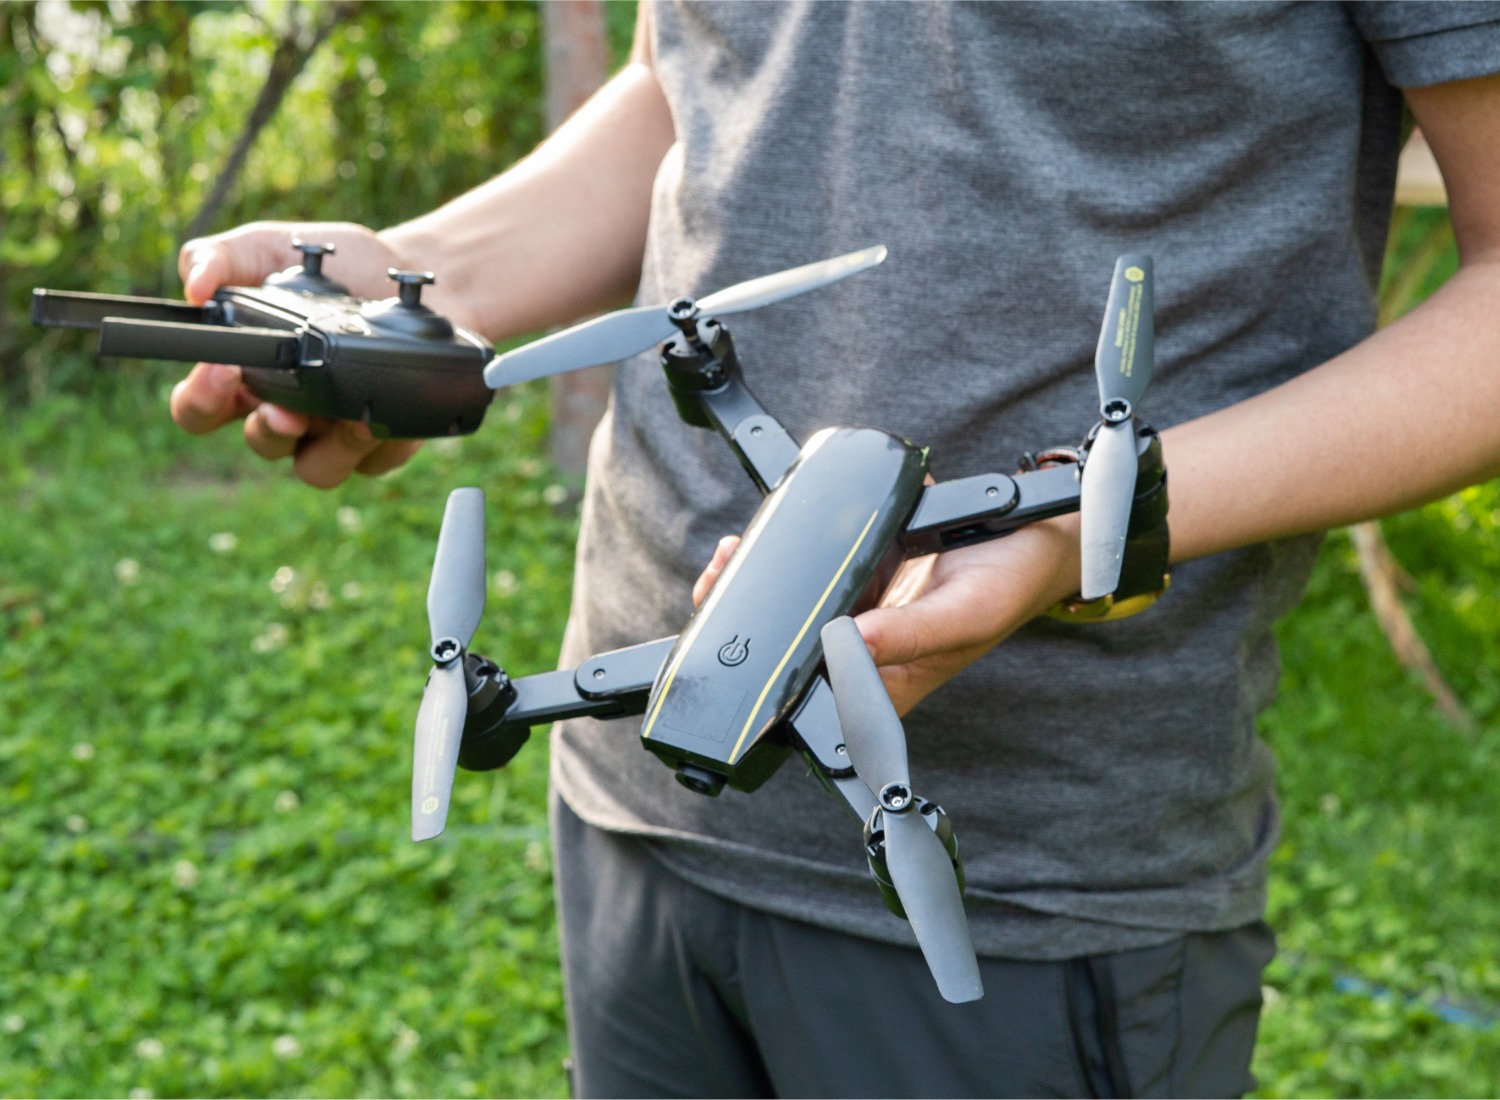 A boy holding a drone and remote